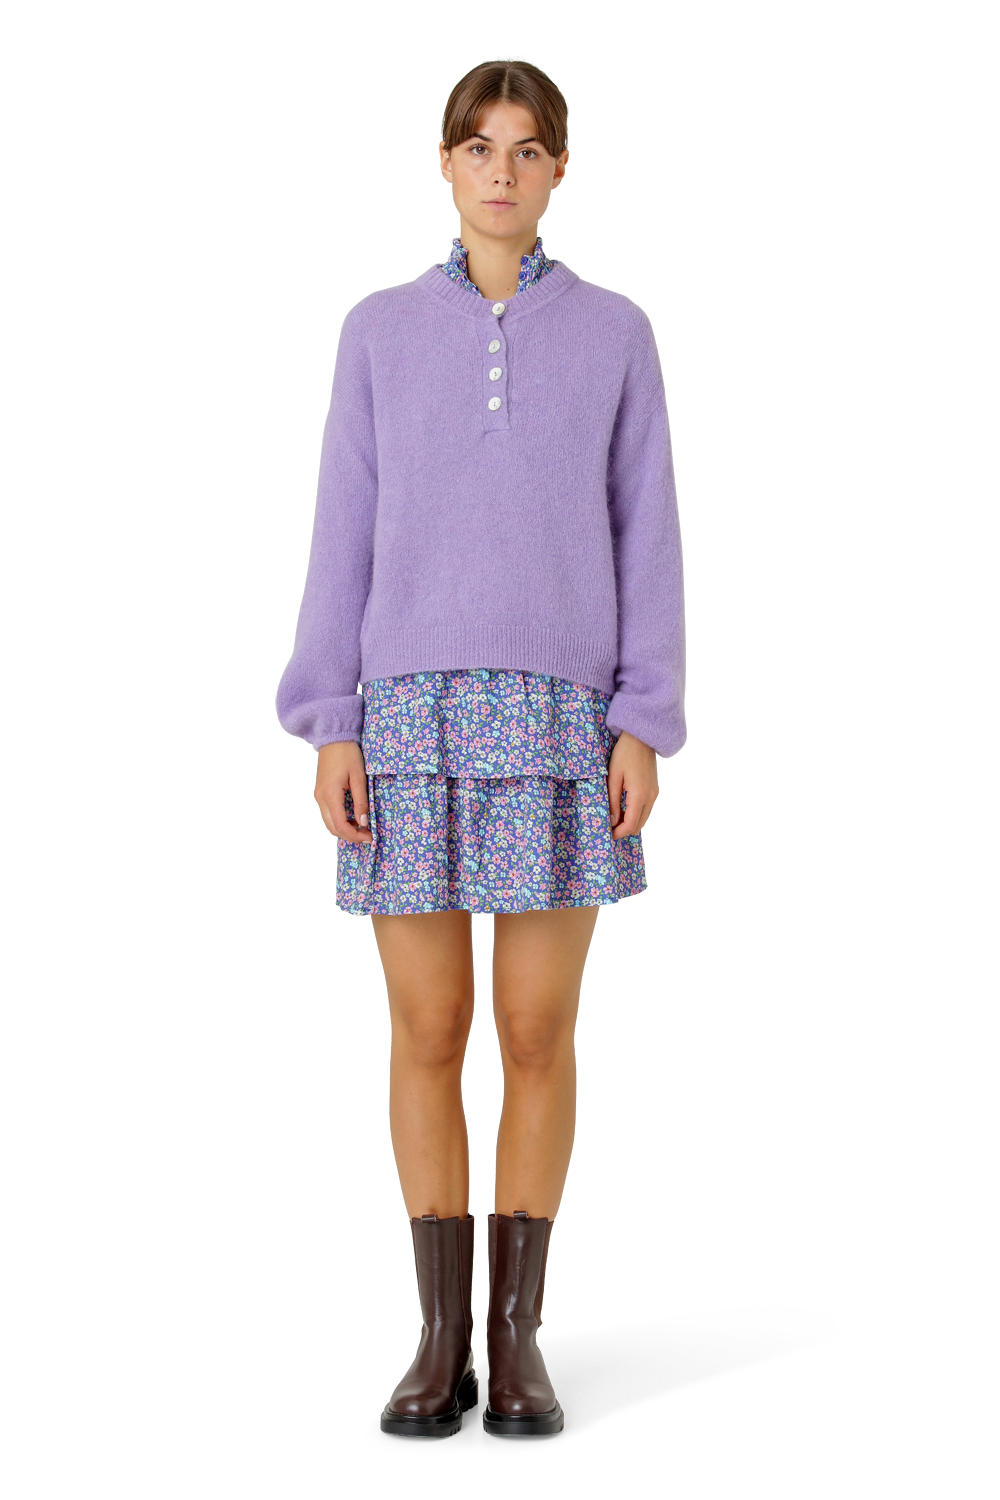 Zelma Pullover Lilac